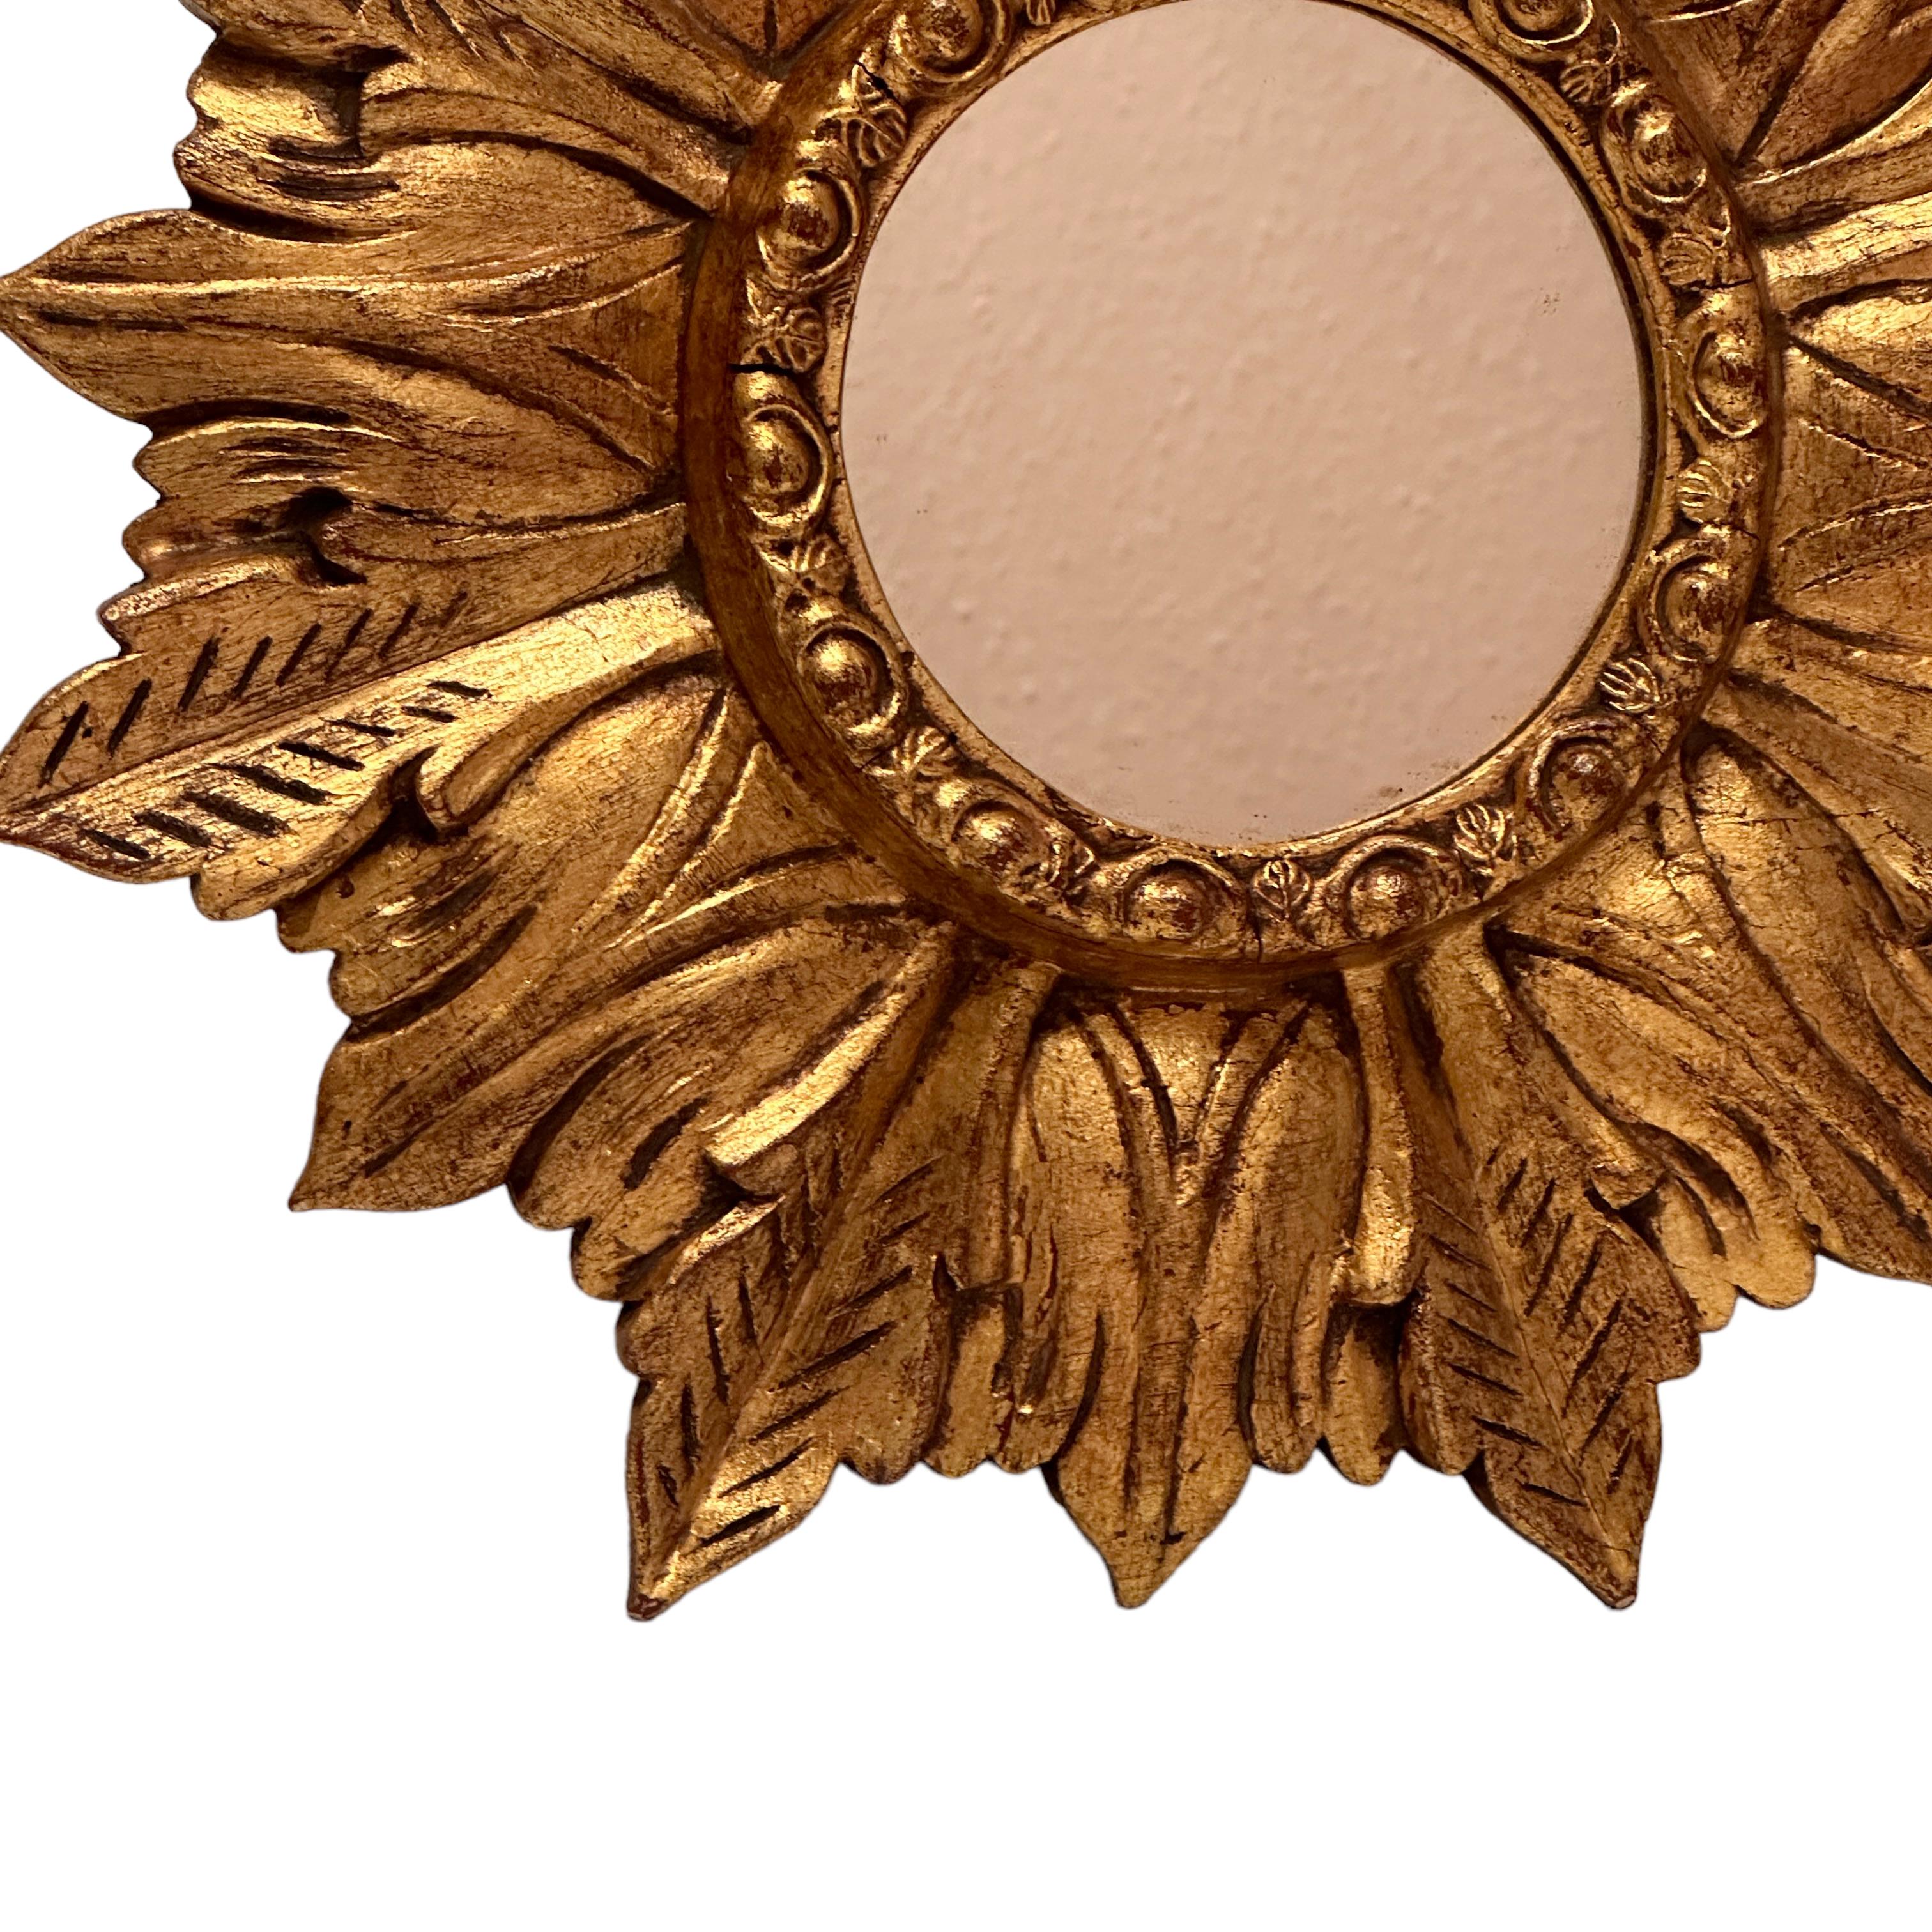 A beautiful starburst sunburst mirror. Made of gilded wood, with a amber color or smoked mirror. It measures approximate 13.63